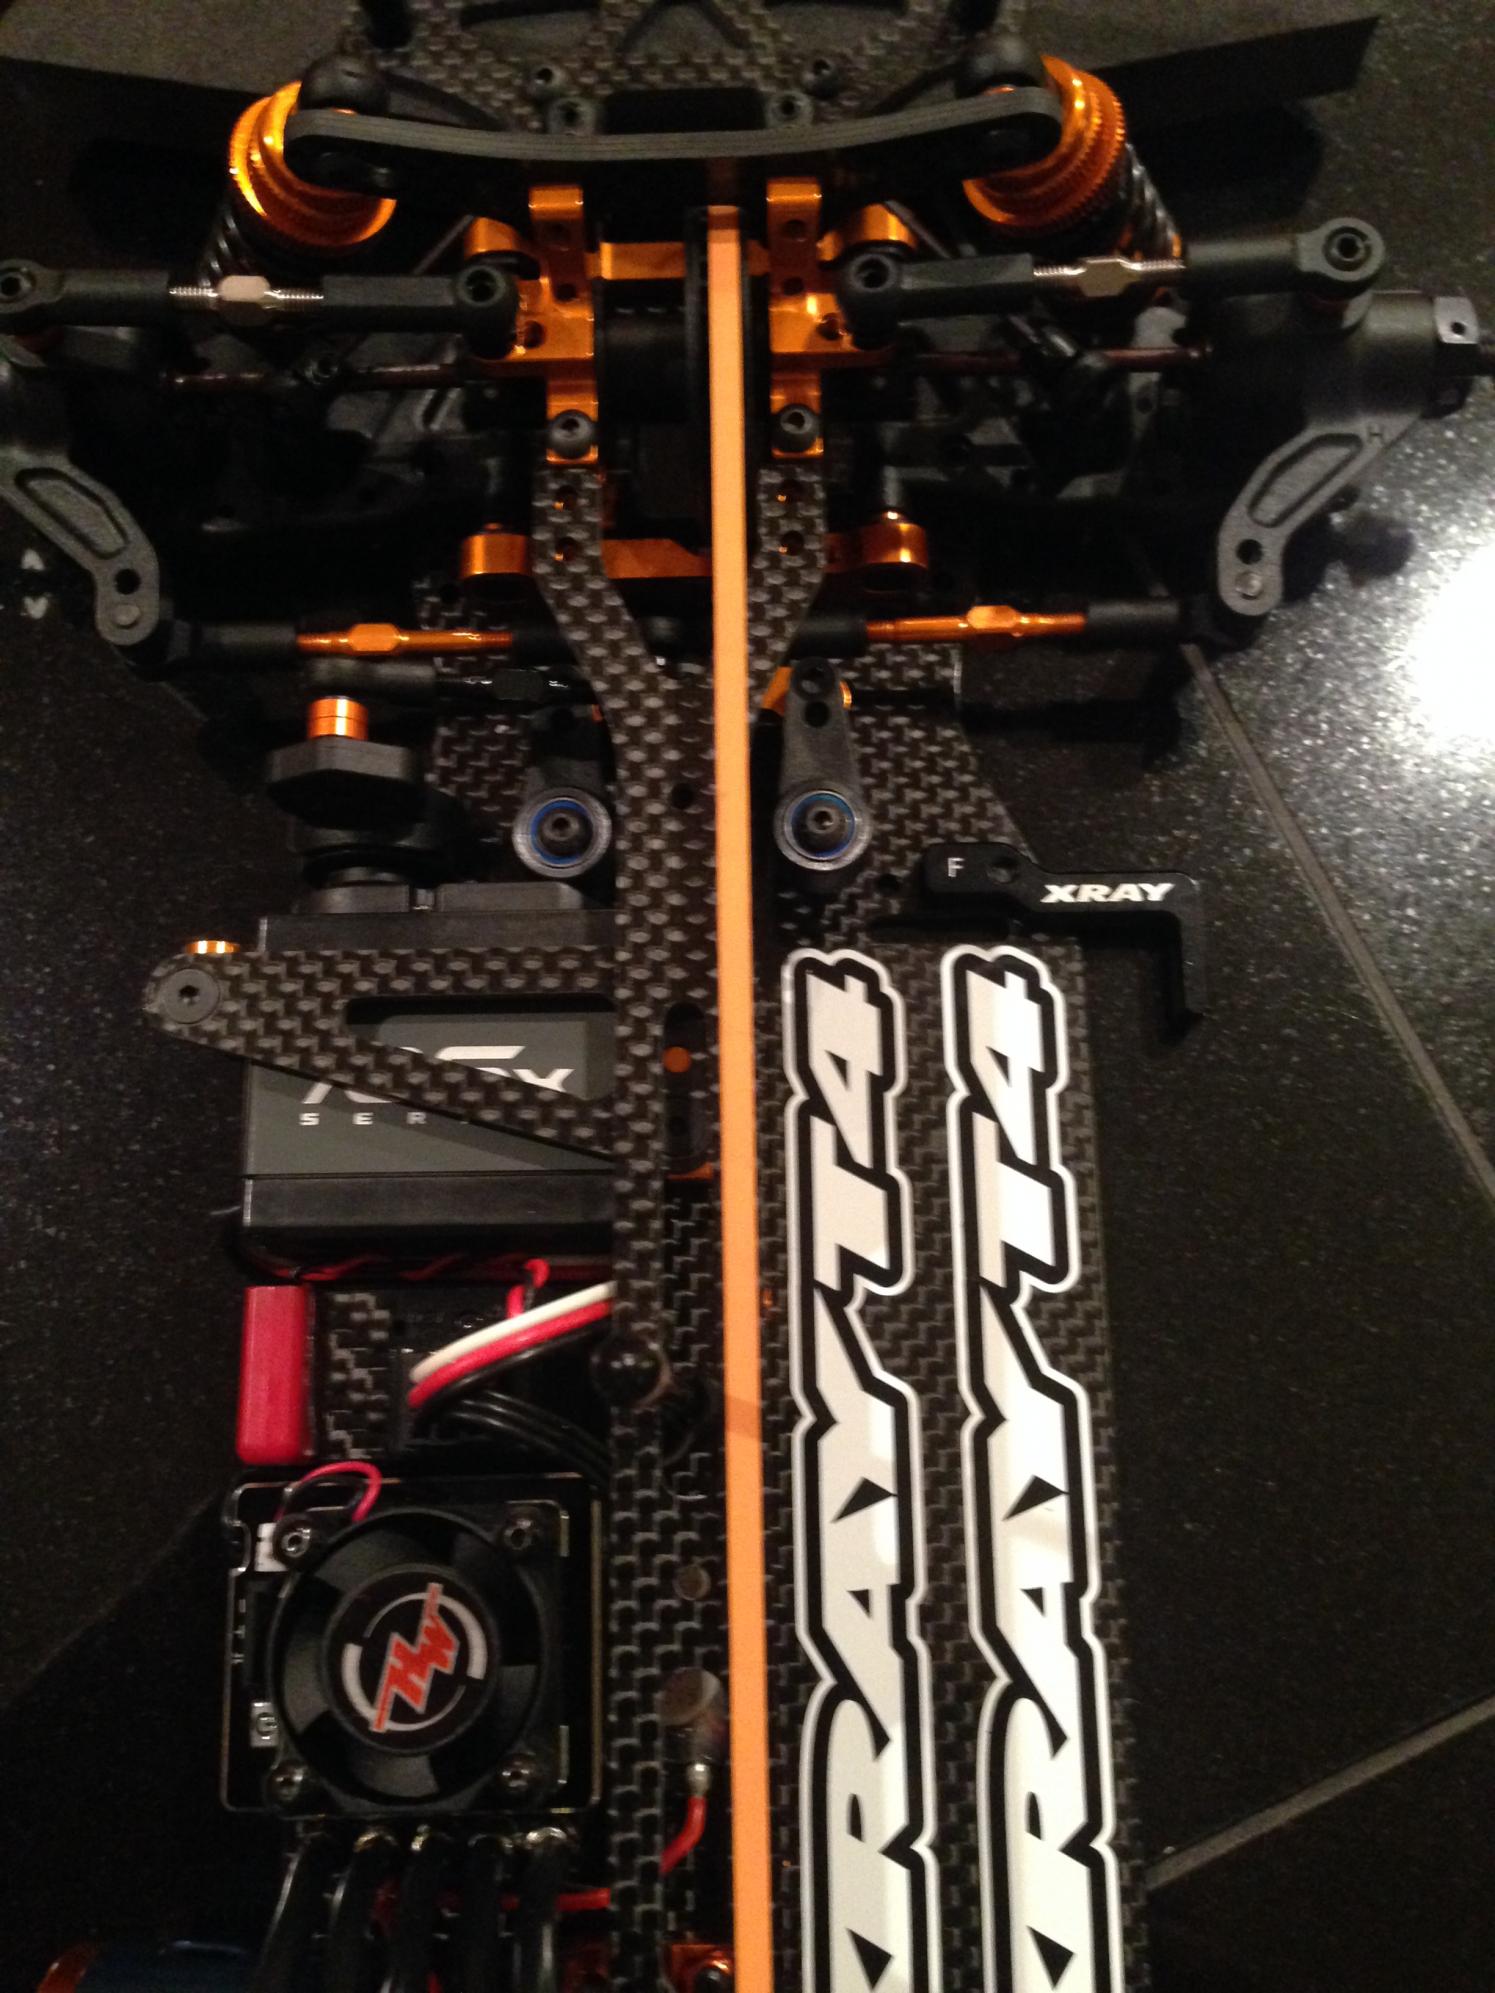 Xray T4'14 - Page 33 - R/C Tech Forums